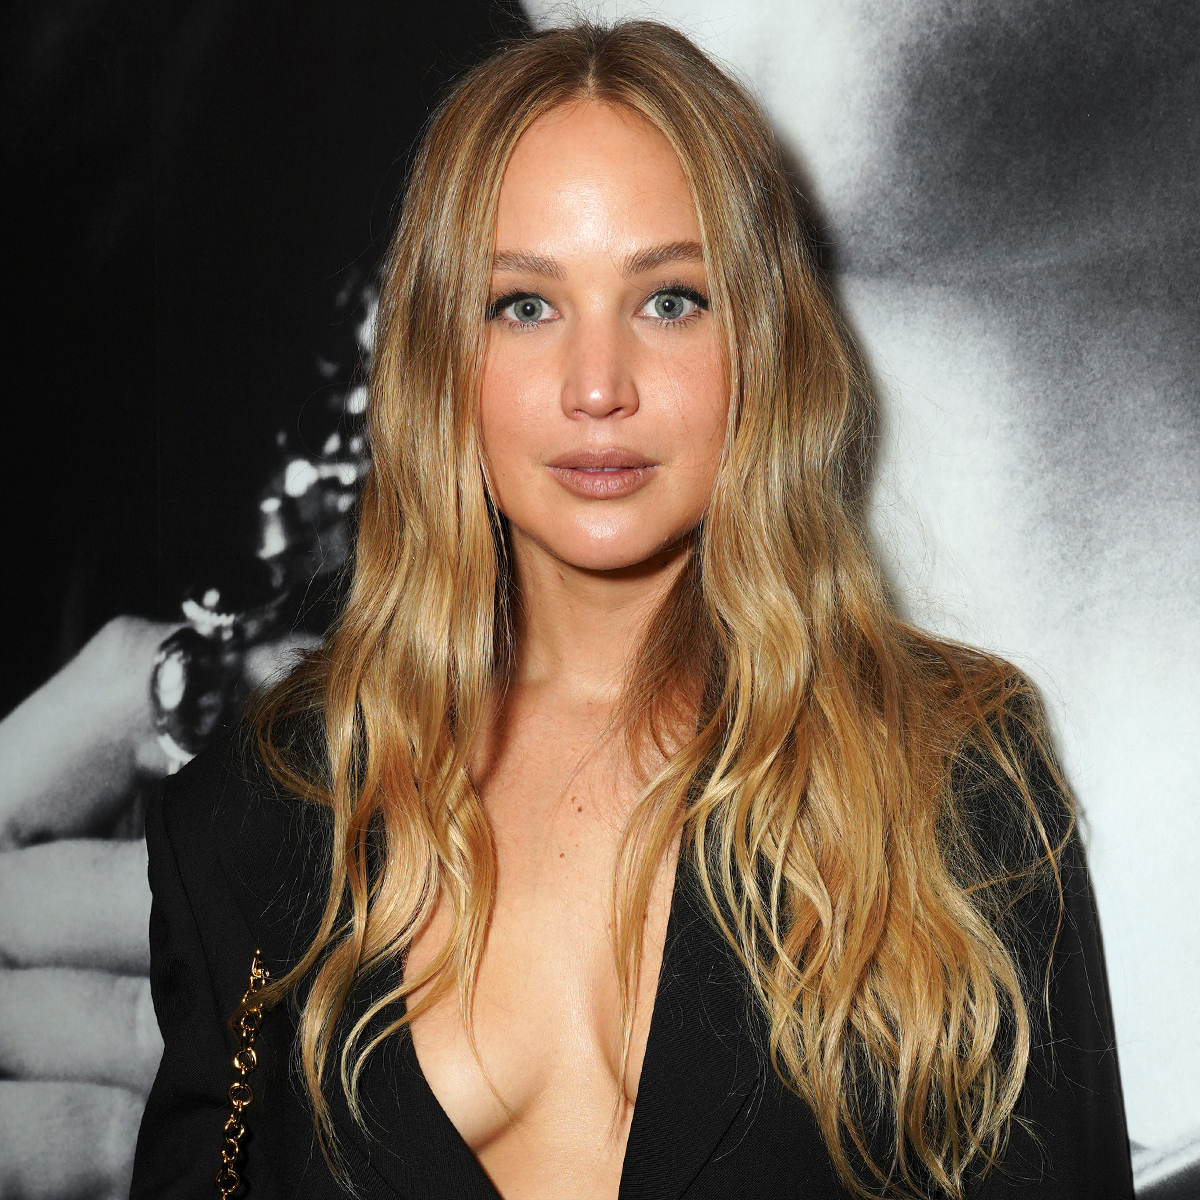 Jennifer Lawrence Steps Out in Daring Style at Awards Season Party on 10th Anniversary of Oscar Win – E! Online